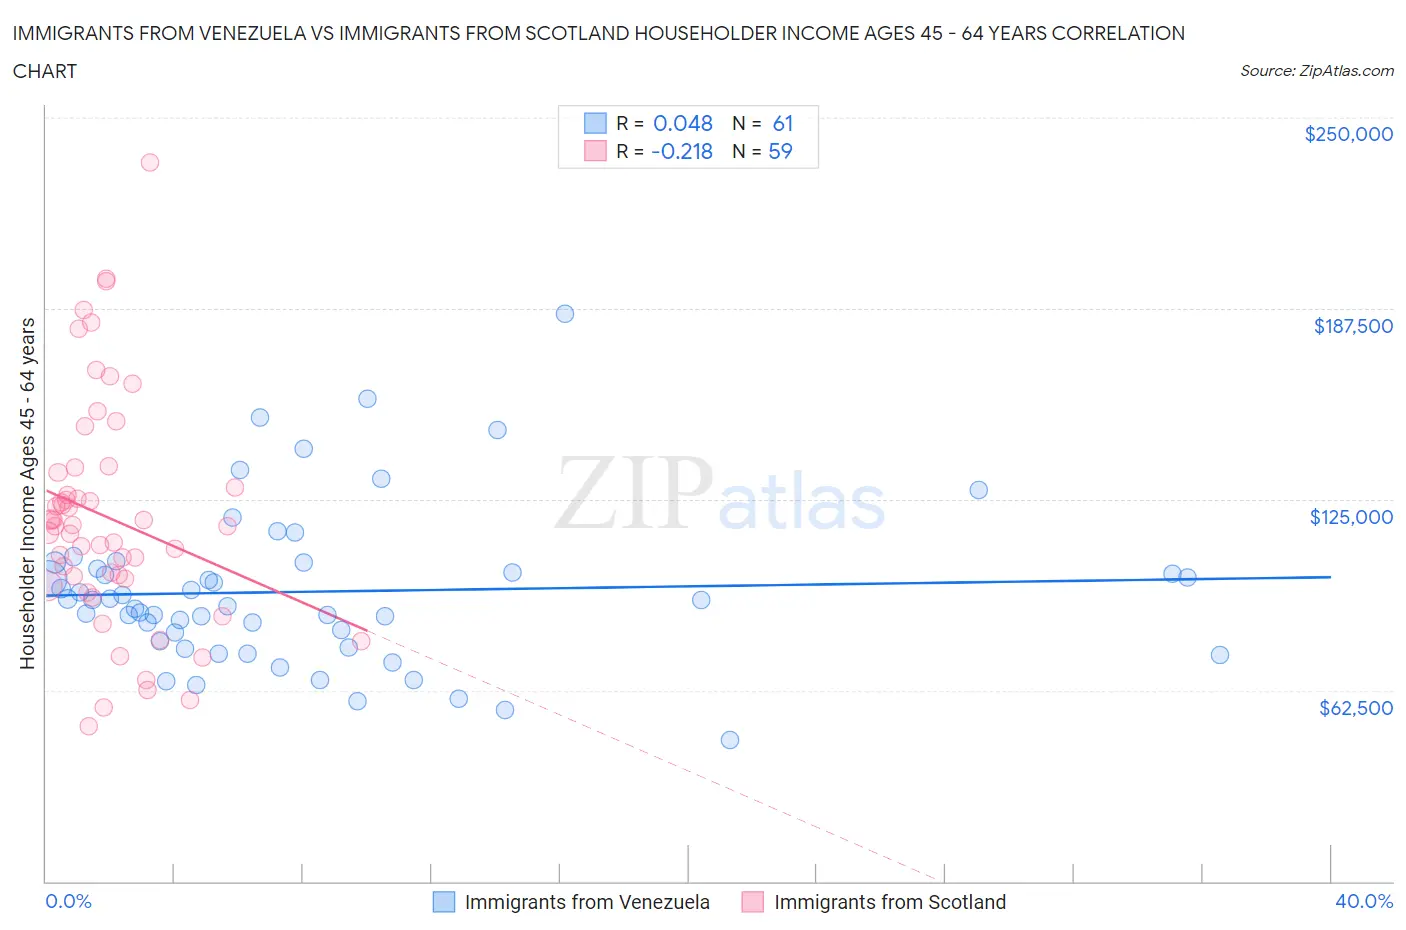 Immigrants from Venezuela vs Immigrants from Scotland Householder Income Ages 45 - 64 years